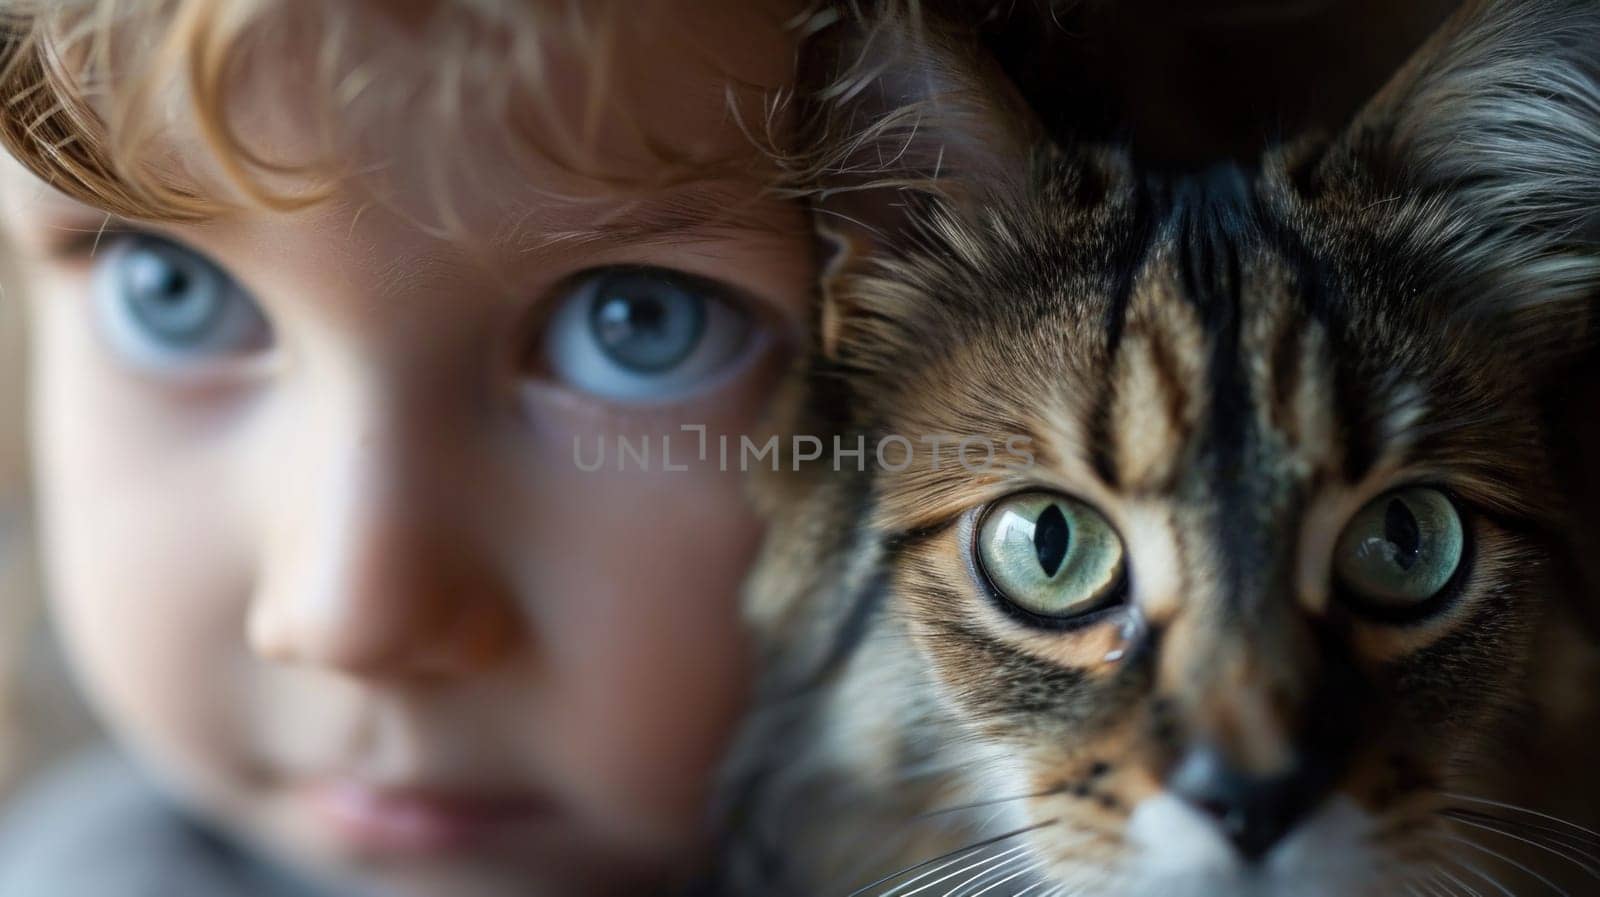 A close up of a cat and child with the face blurred